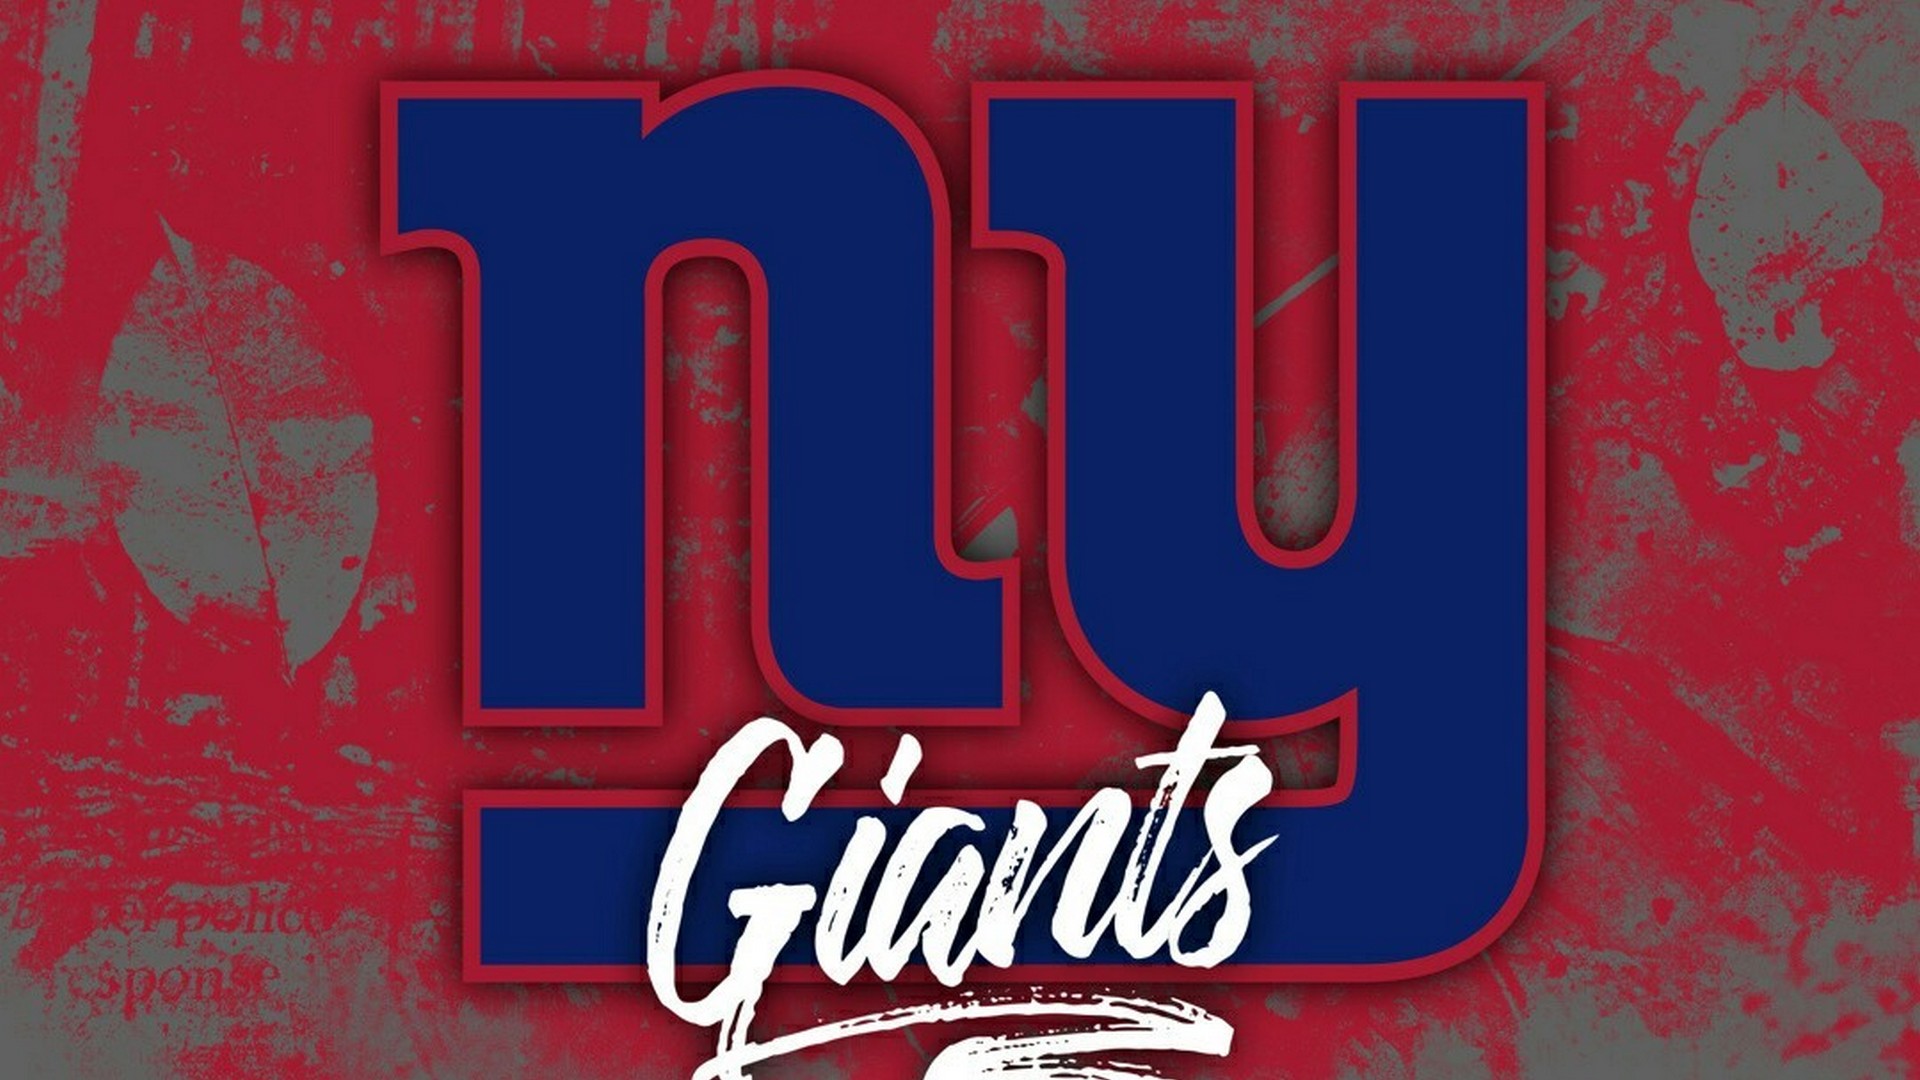 Wallpaper Desktop New York Giants HD With high-resolution 1920X1080 pixel. You can use this wallpaper for your Mac or Windows Desktop Background, iPhone, Android or Tablet and another Smartphone device